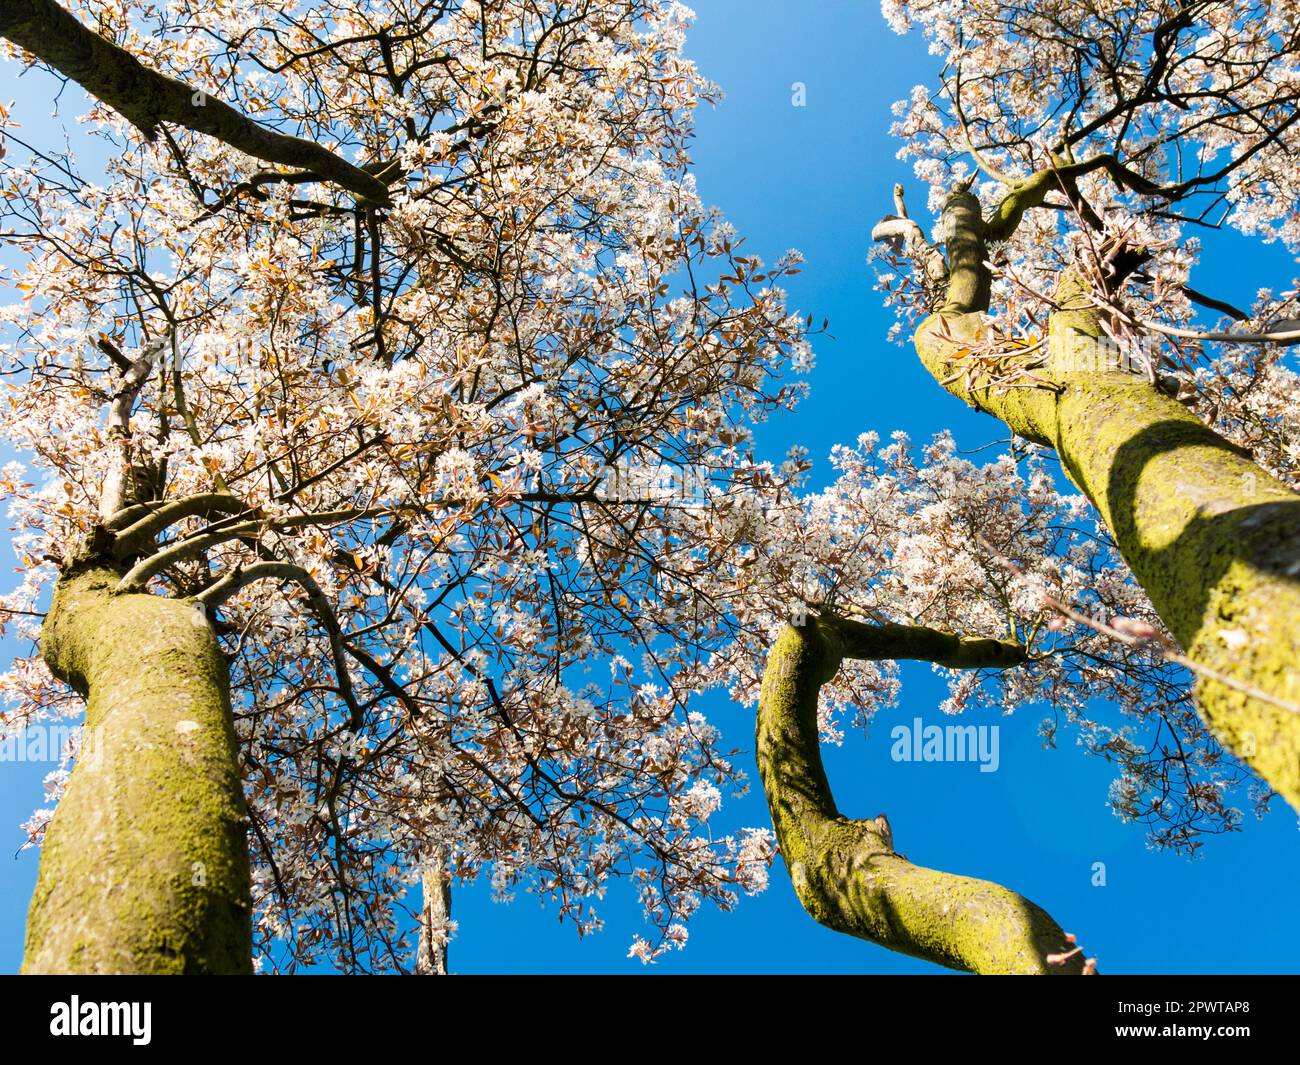 Juneberry or snowy mespilus tree, Amelanchier lamarkii, tree trunks with flowers in spring against clear blue sky, Netherlands Stock Photo